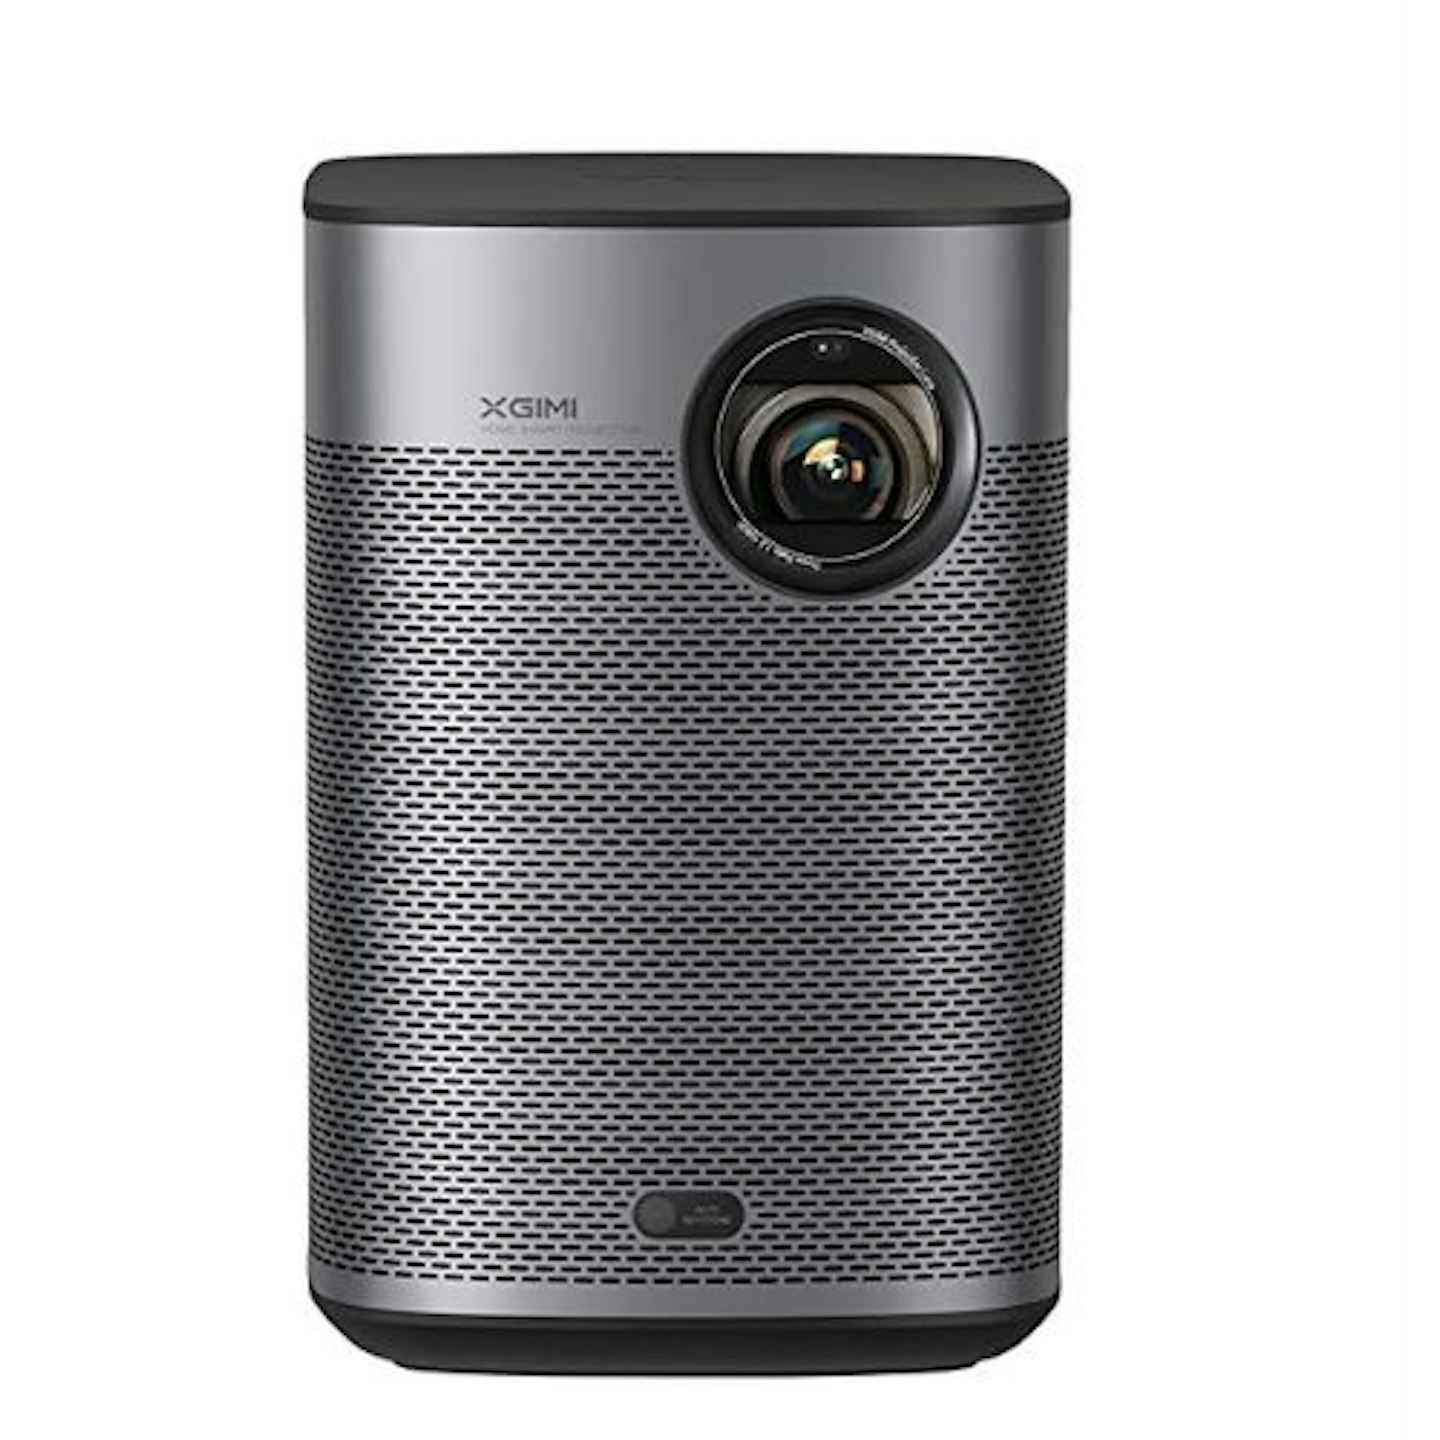  First Father's Day Gifts: XGIMI Halo+ 1080P Portable Projector